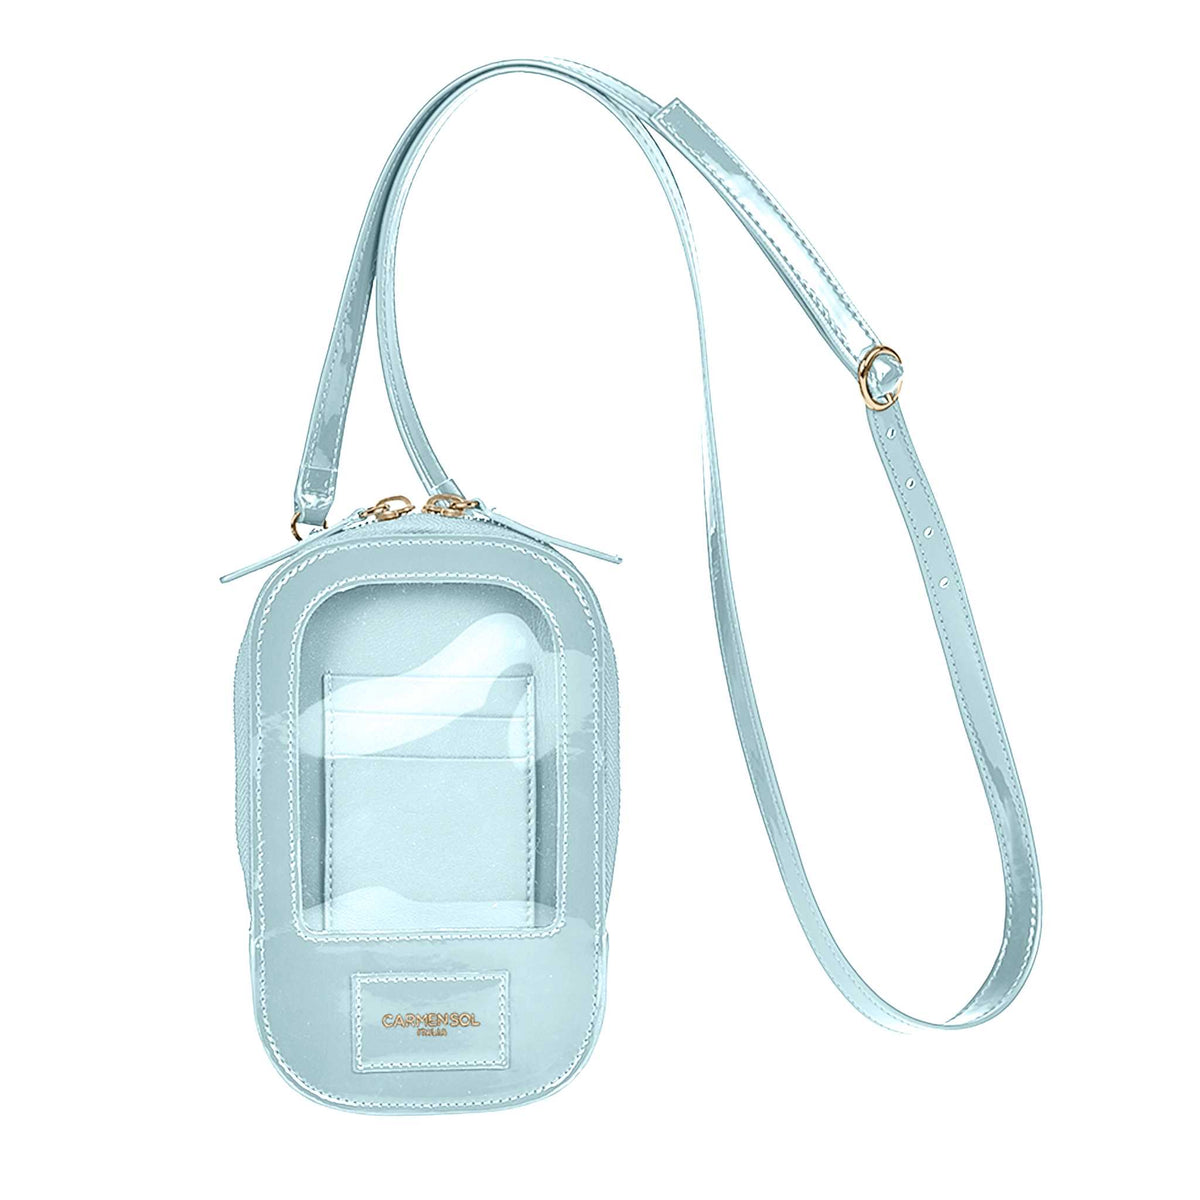 Baby blue Gio smartphone holder from Carmen Sol